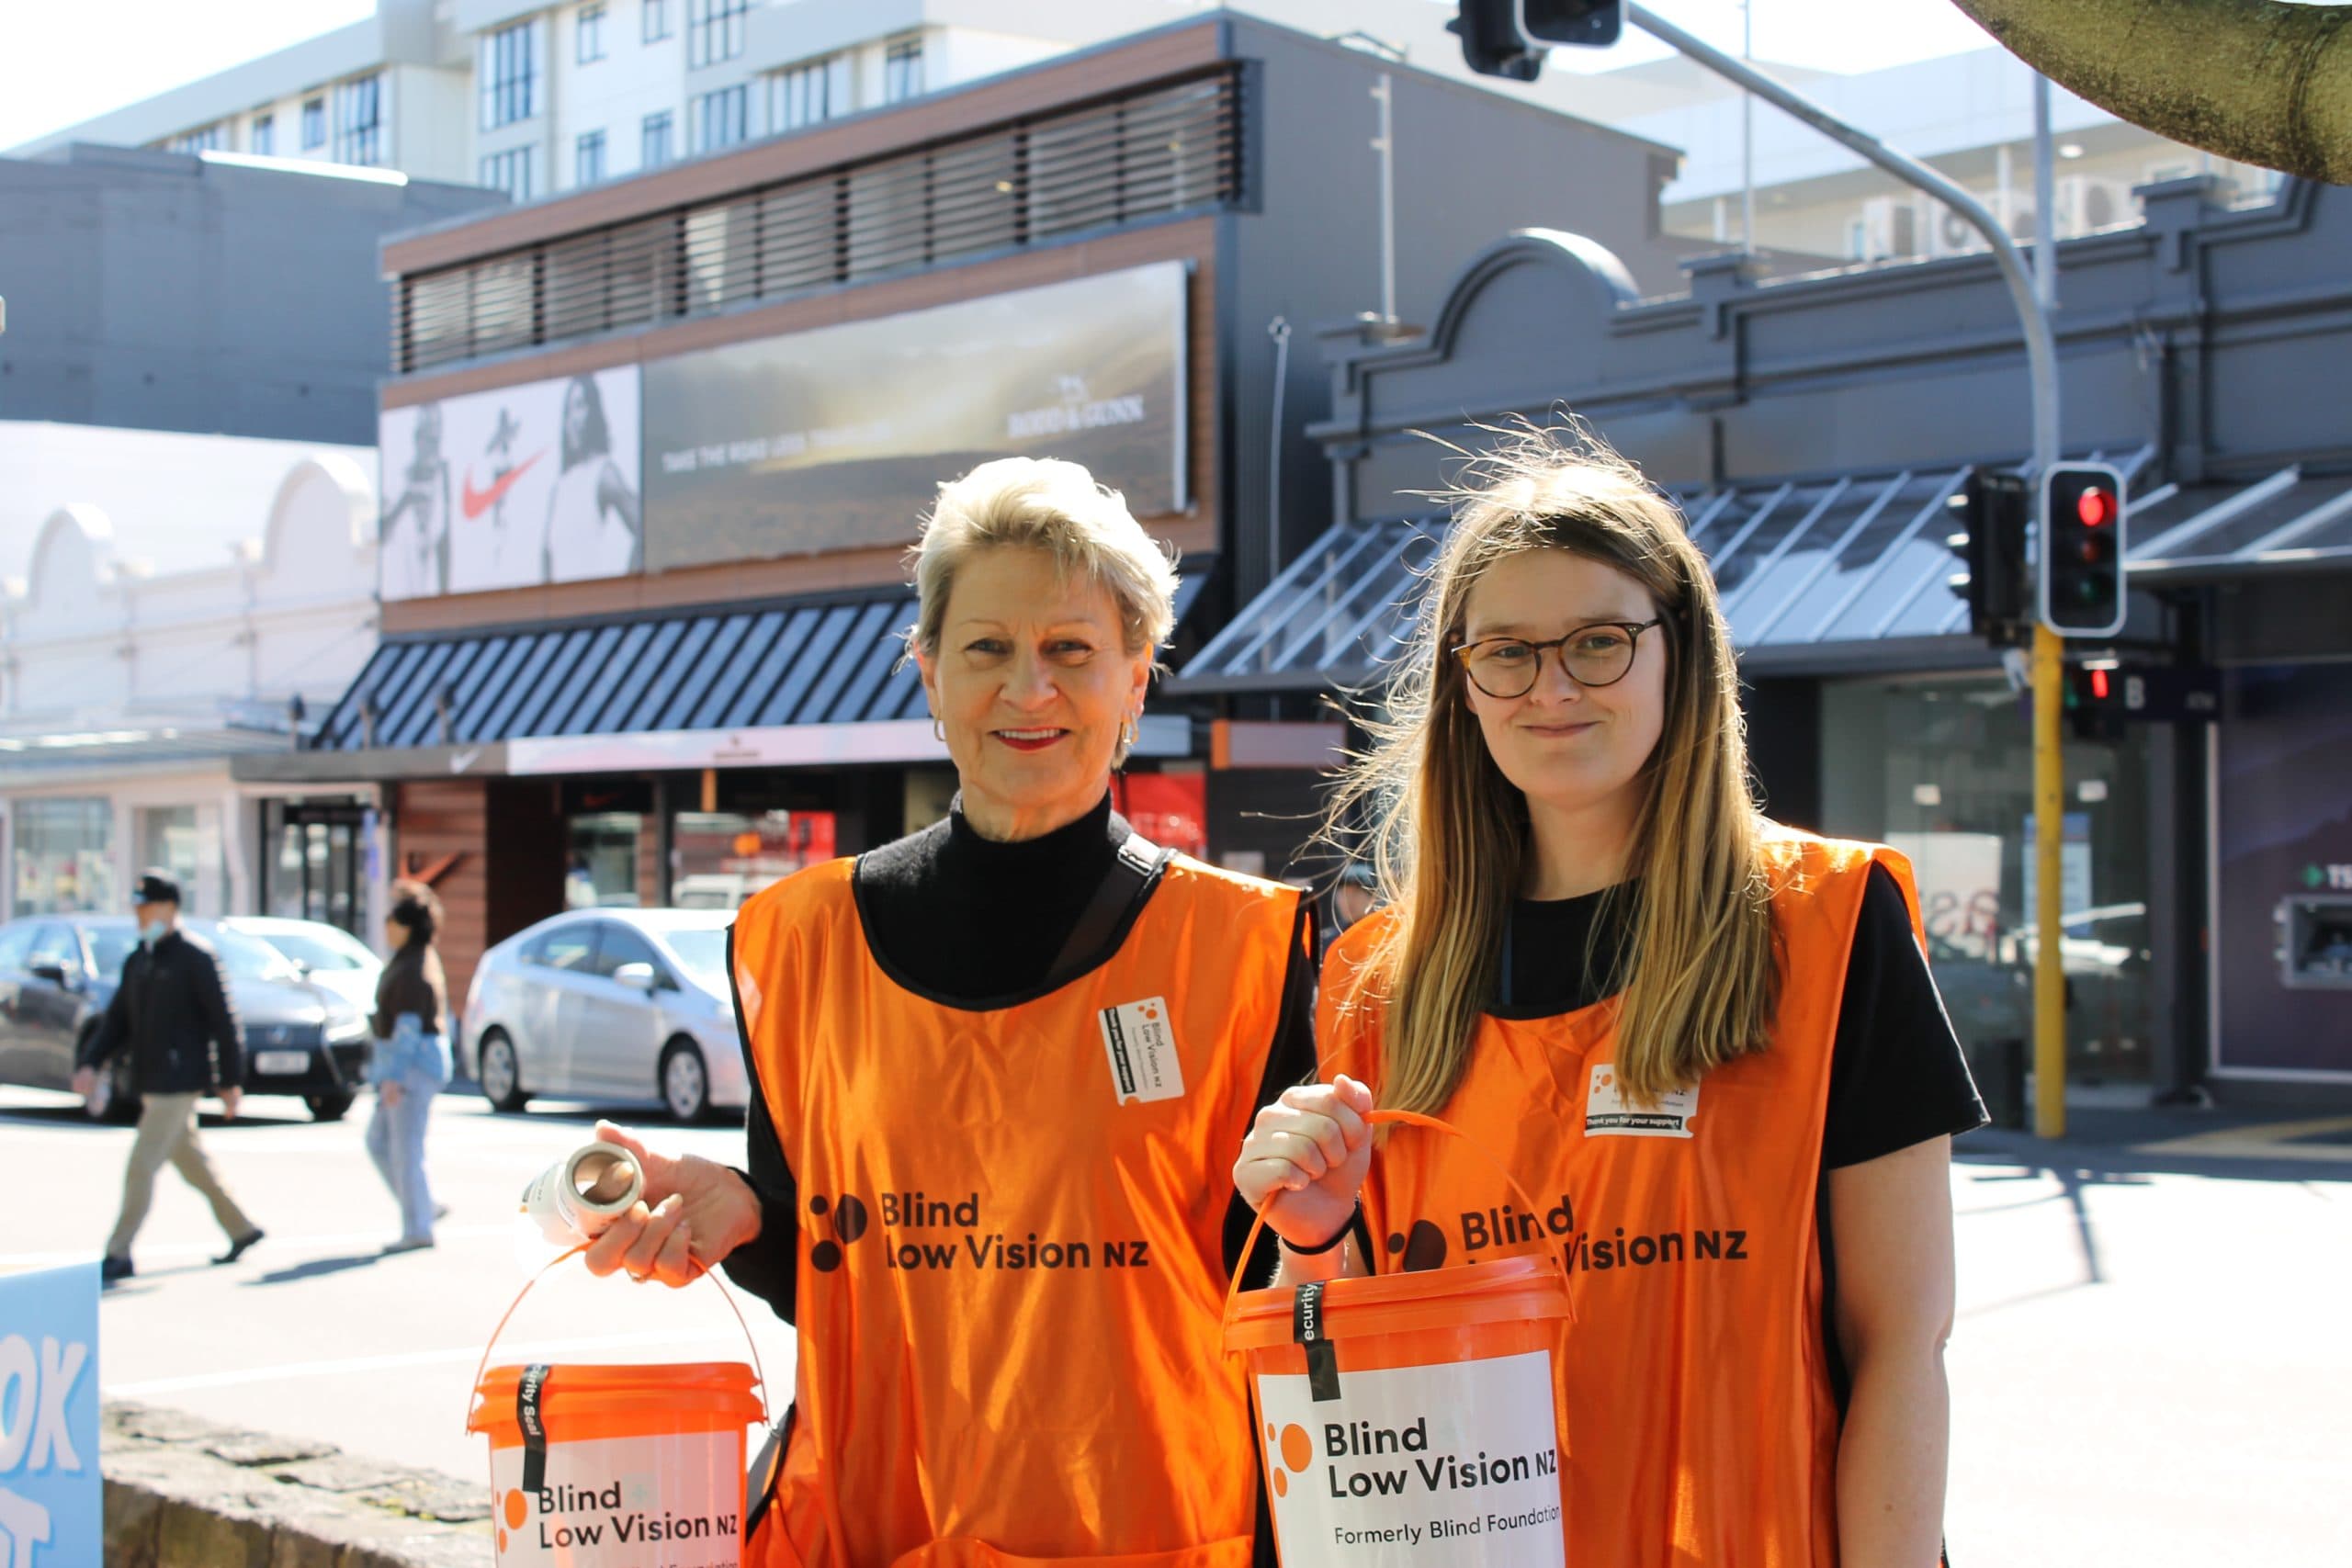 Two fundraising voluntees, Lynne and Hannah are collecting in Newmarket, they hold orange buckets and wear Blind Low Vision NZ bibs